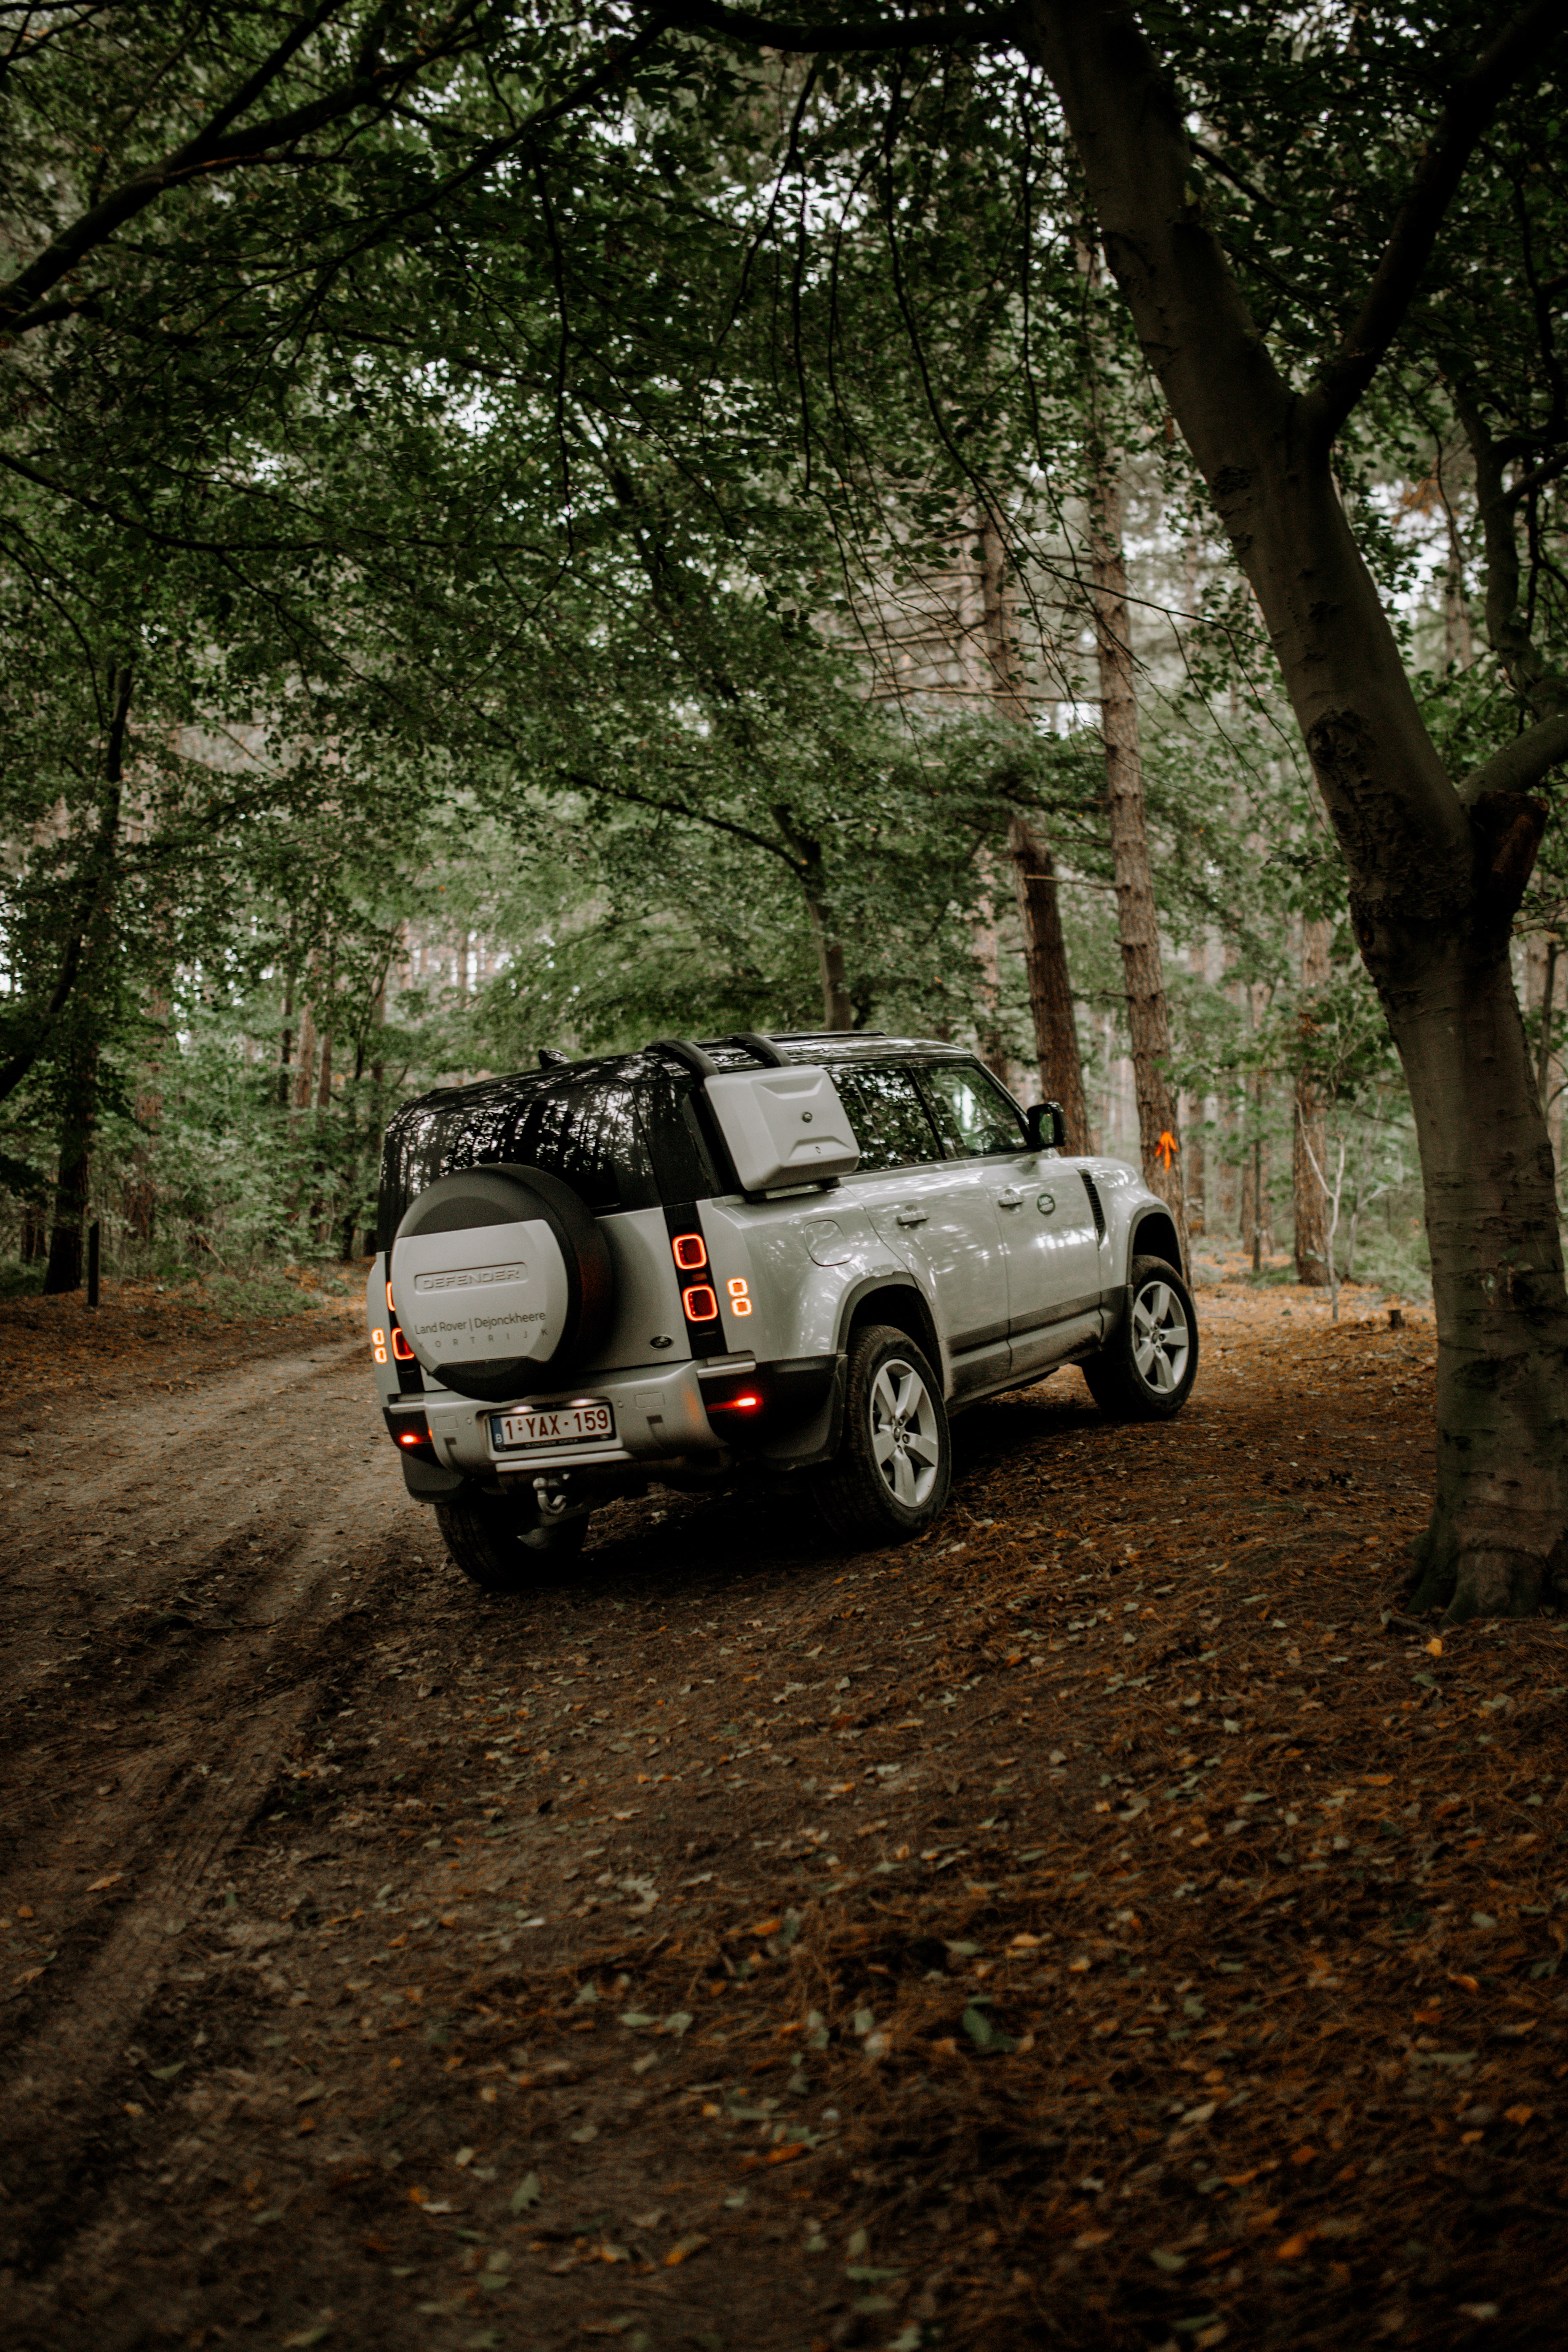 suv, land rover, rear view, cars, forest, car, back view Full HD